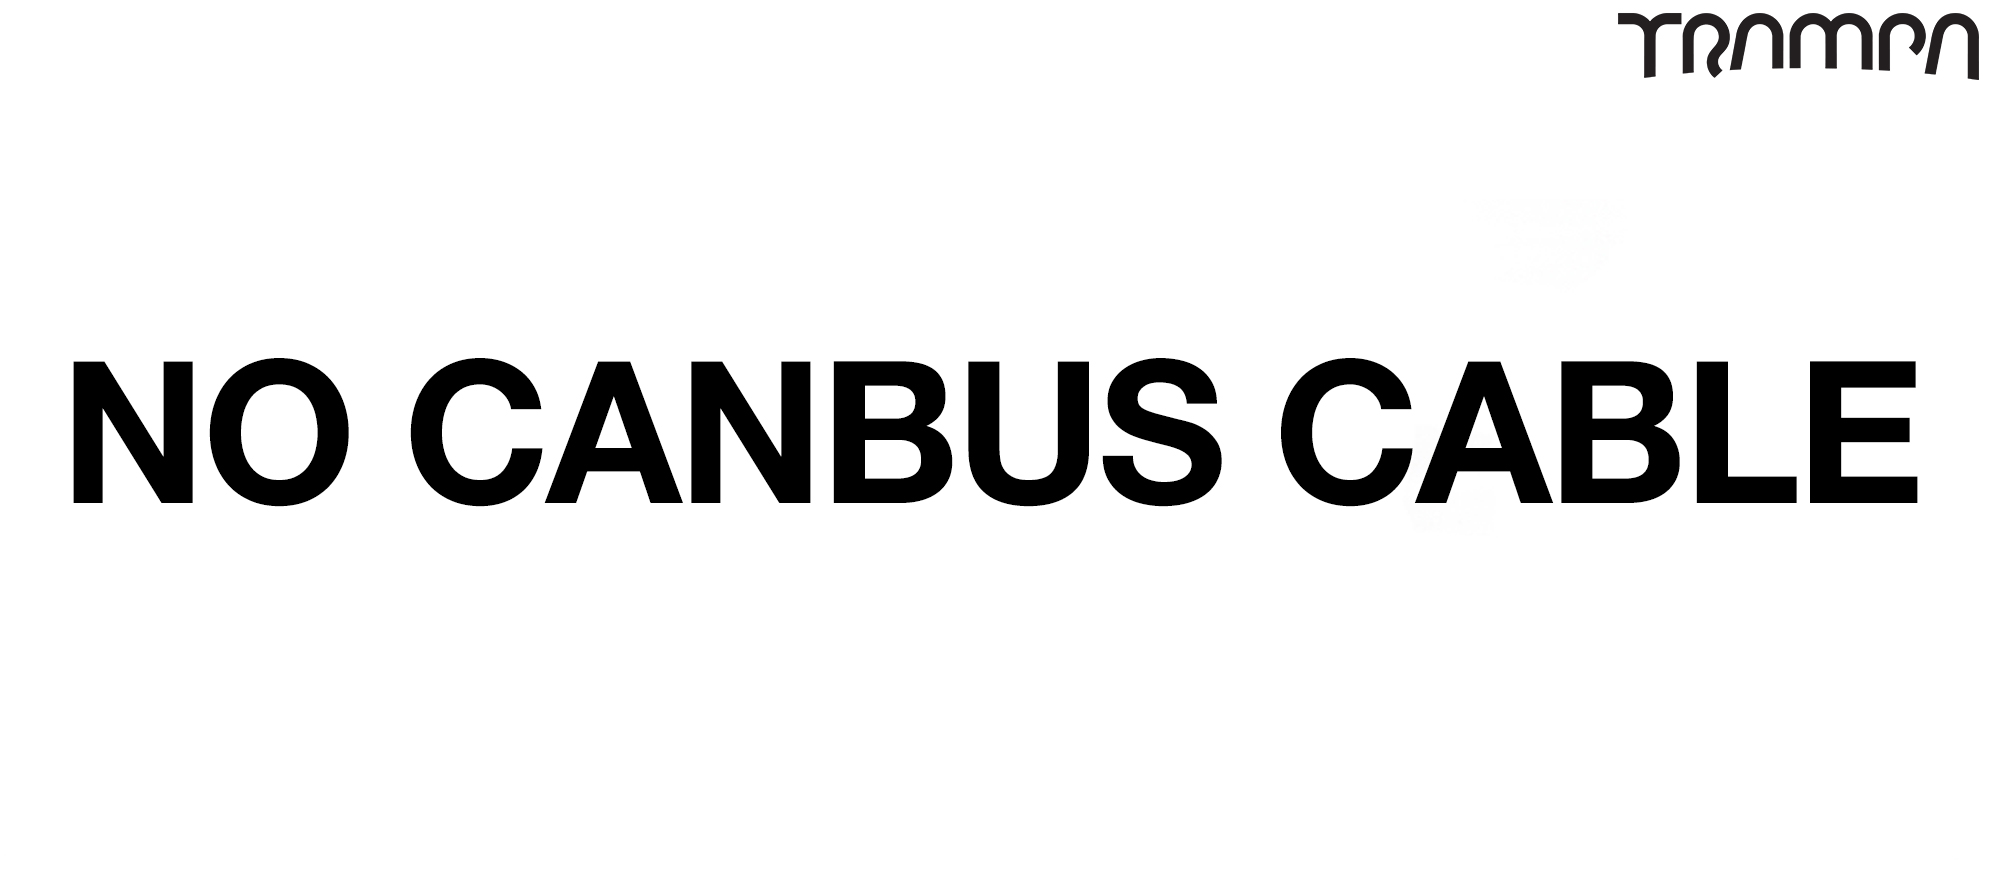 No Canbus Cable